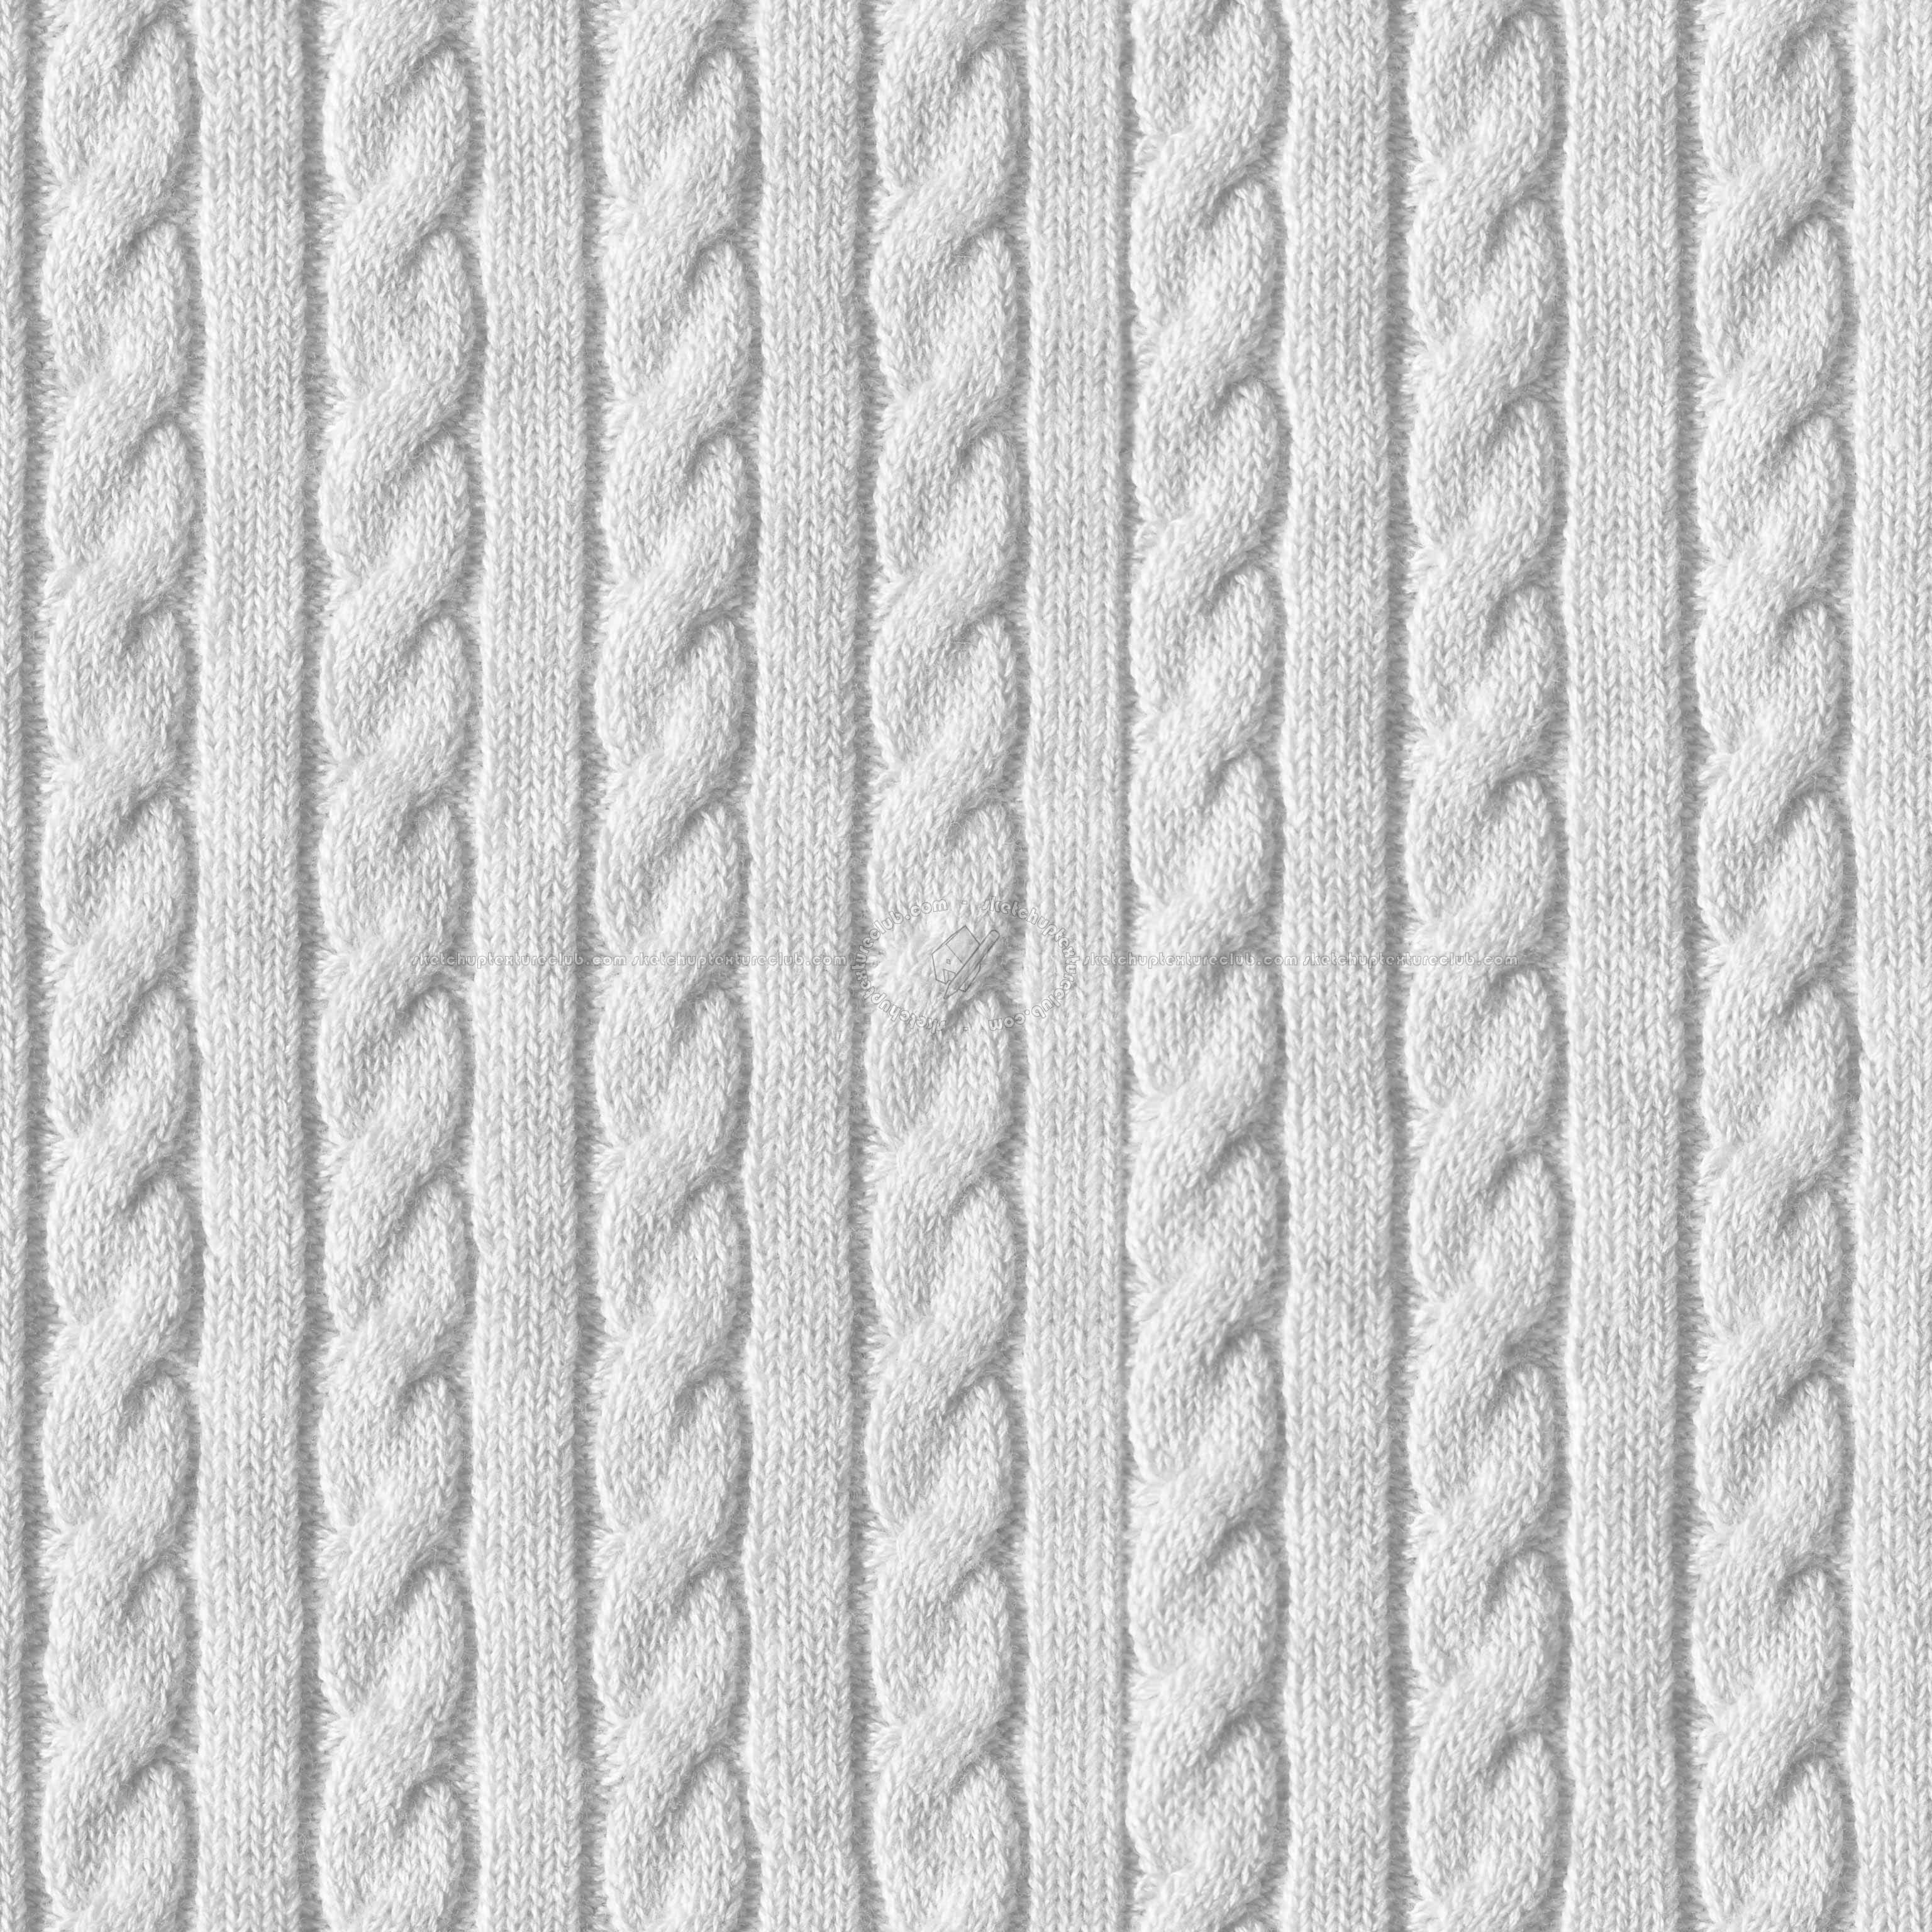 Close-up Image Of Soft Knitted Wool Texture Wallpaper